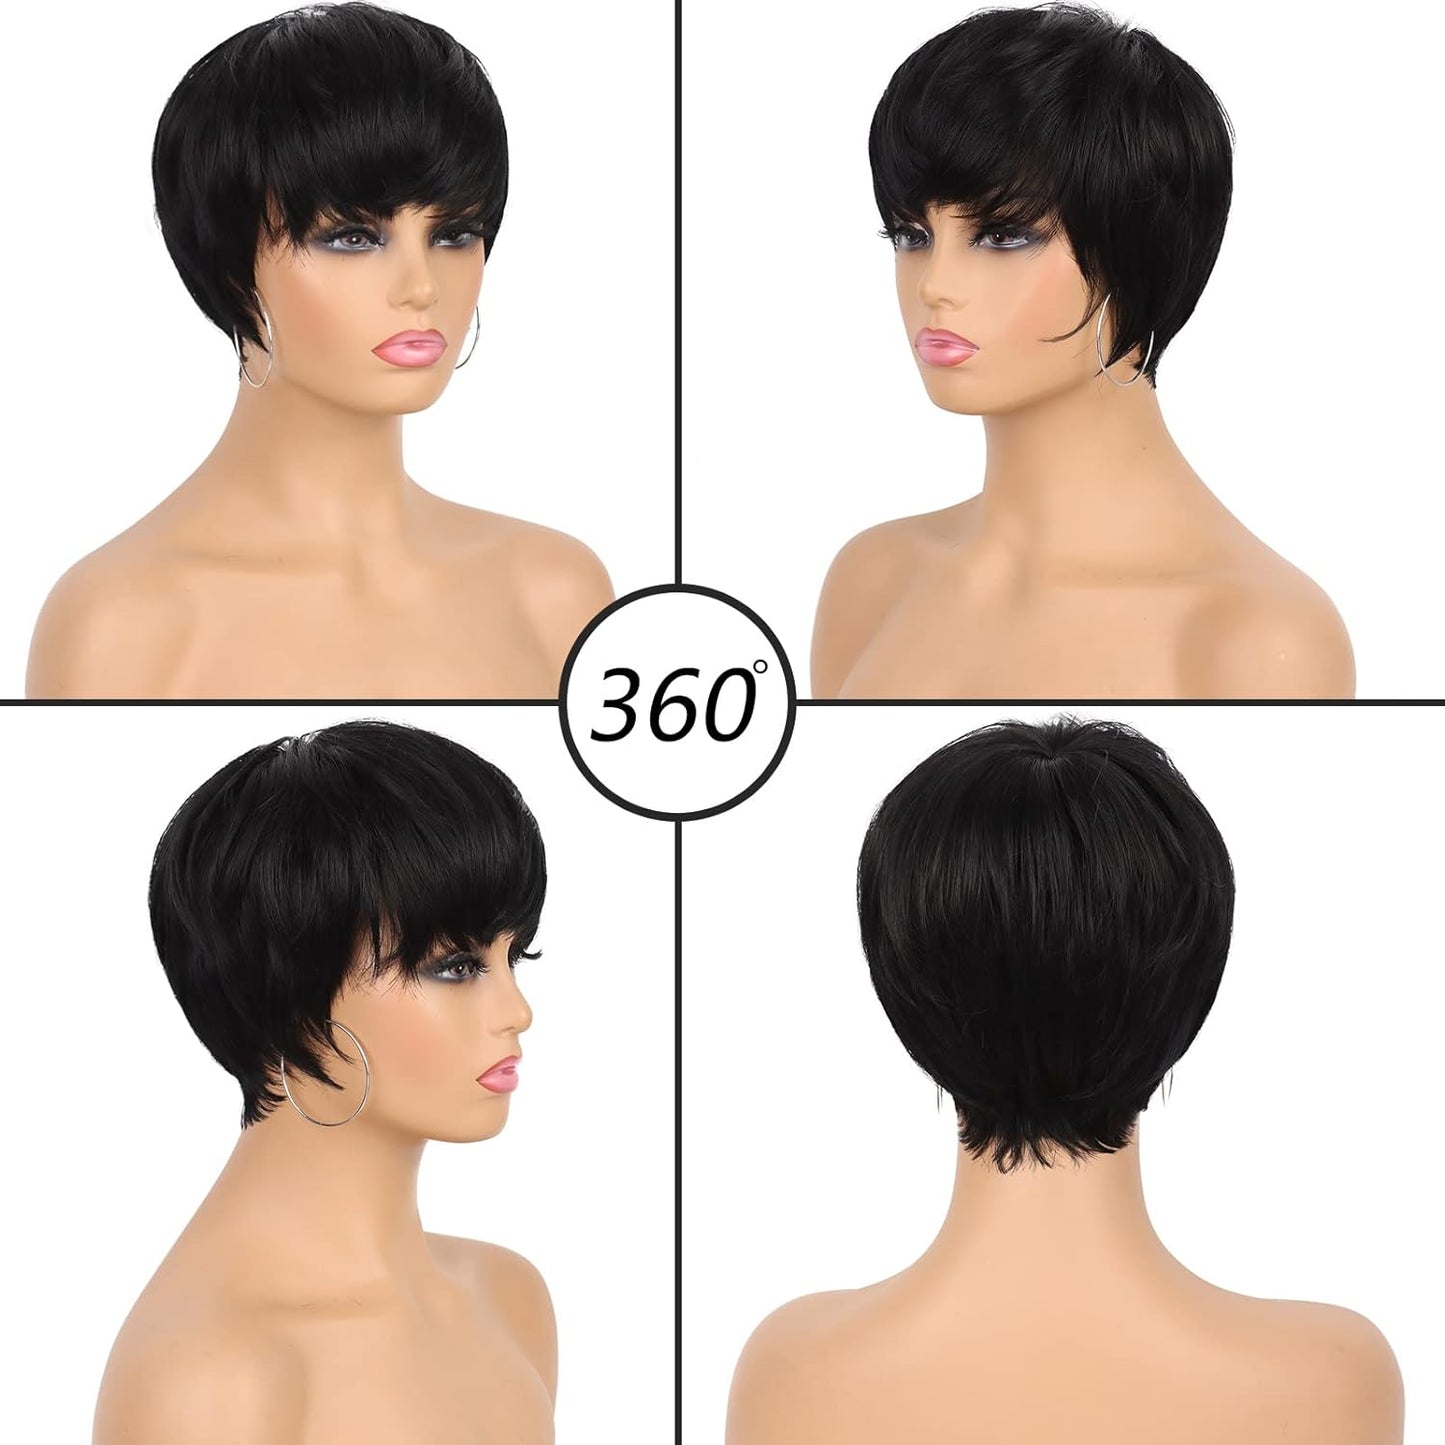 Pixie Cut Wig for Black Women Blonde 613 Short Wig with Bangs Layered Straight Hair Heat Resistant Synthetic Wig for Daily Use(613)